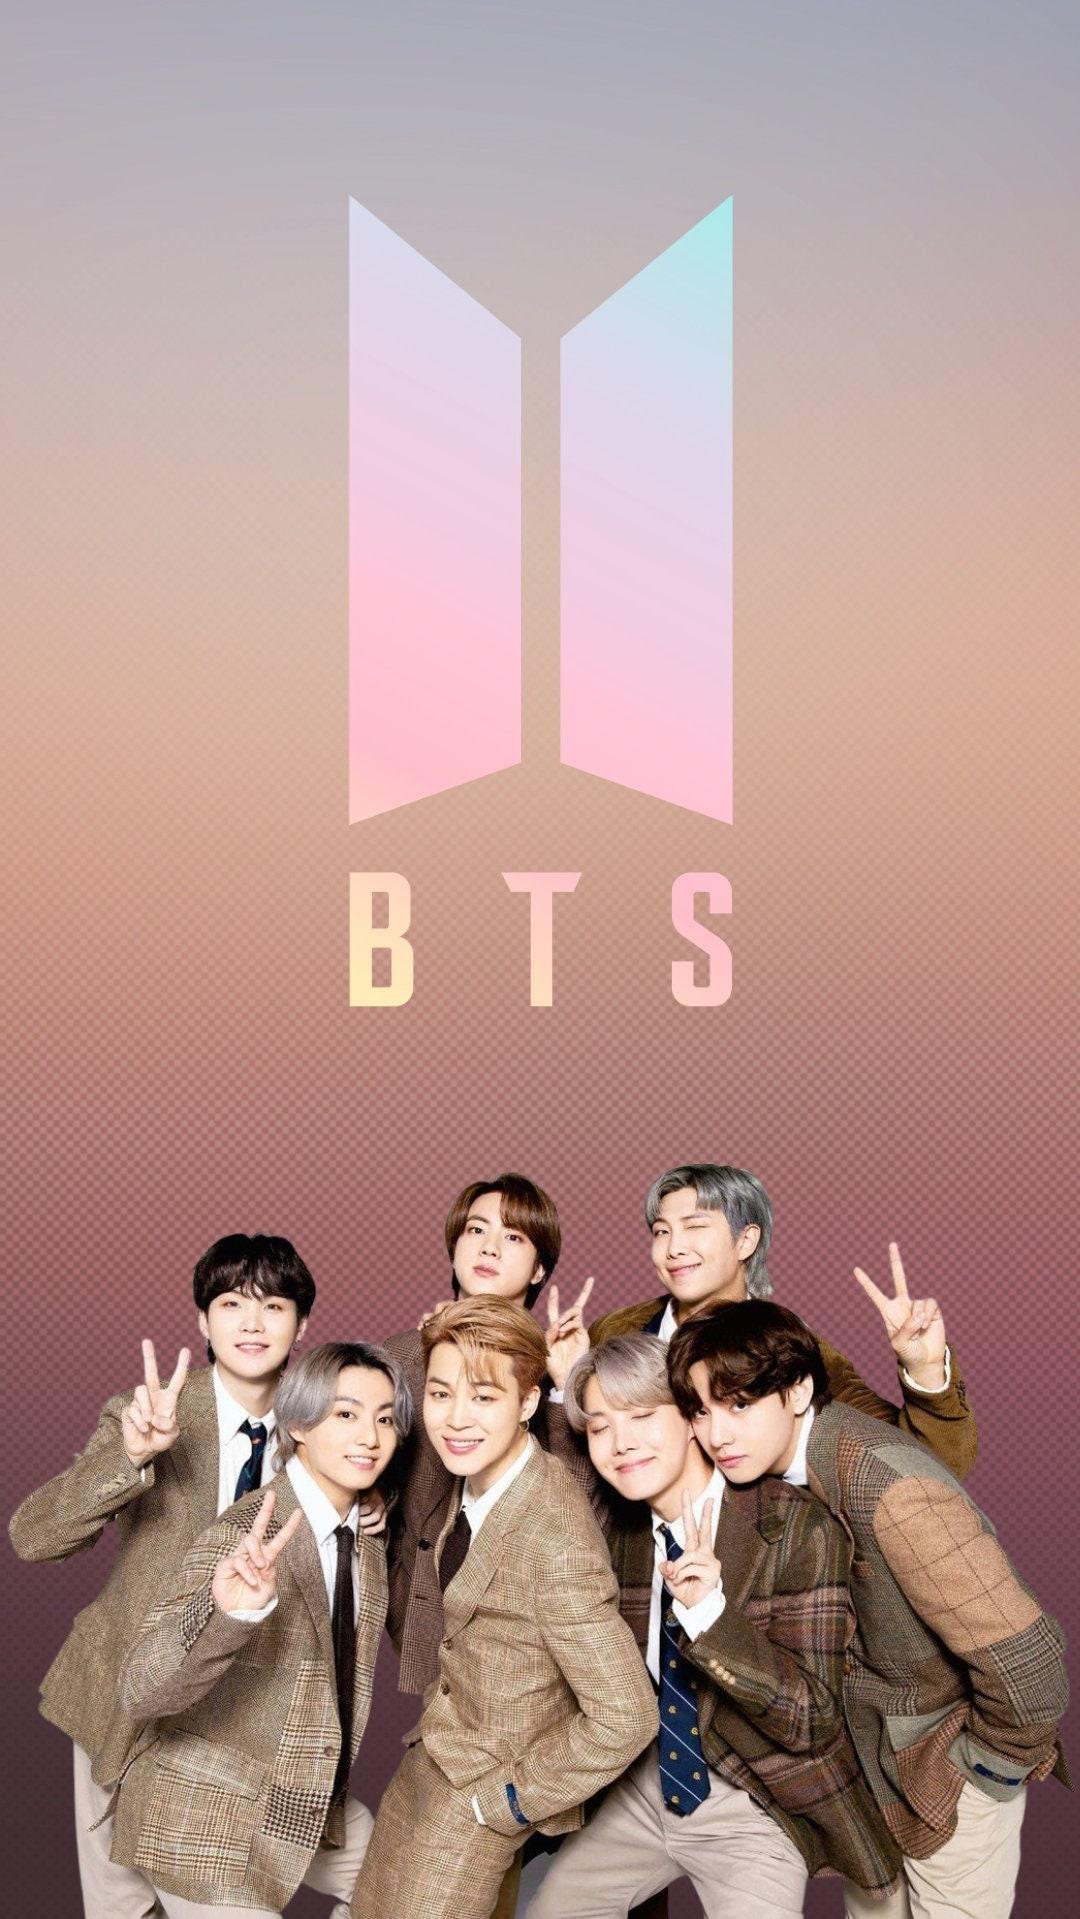 BTS Profile Pics, Wallpaper Pictures for BTS Army Fans!